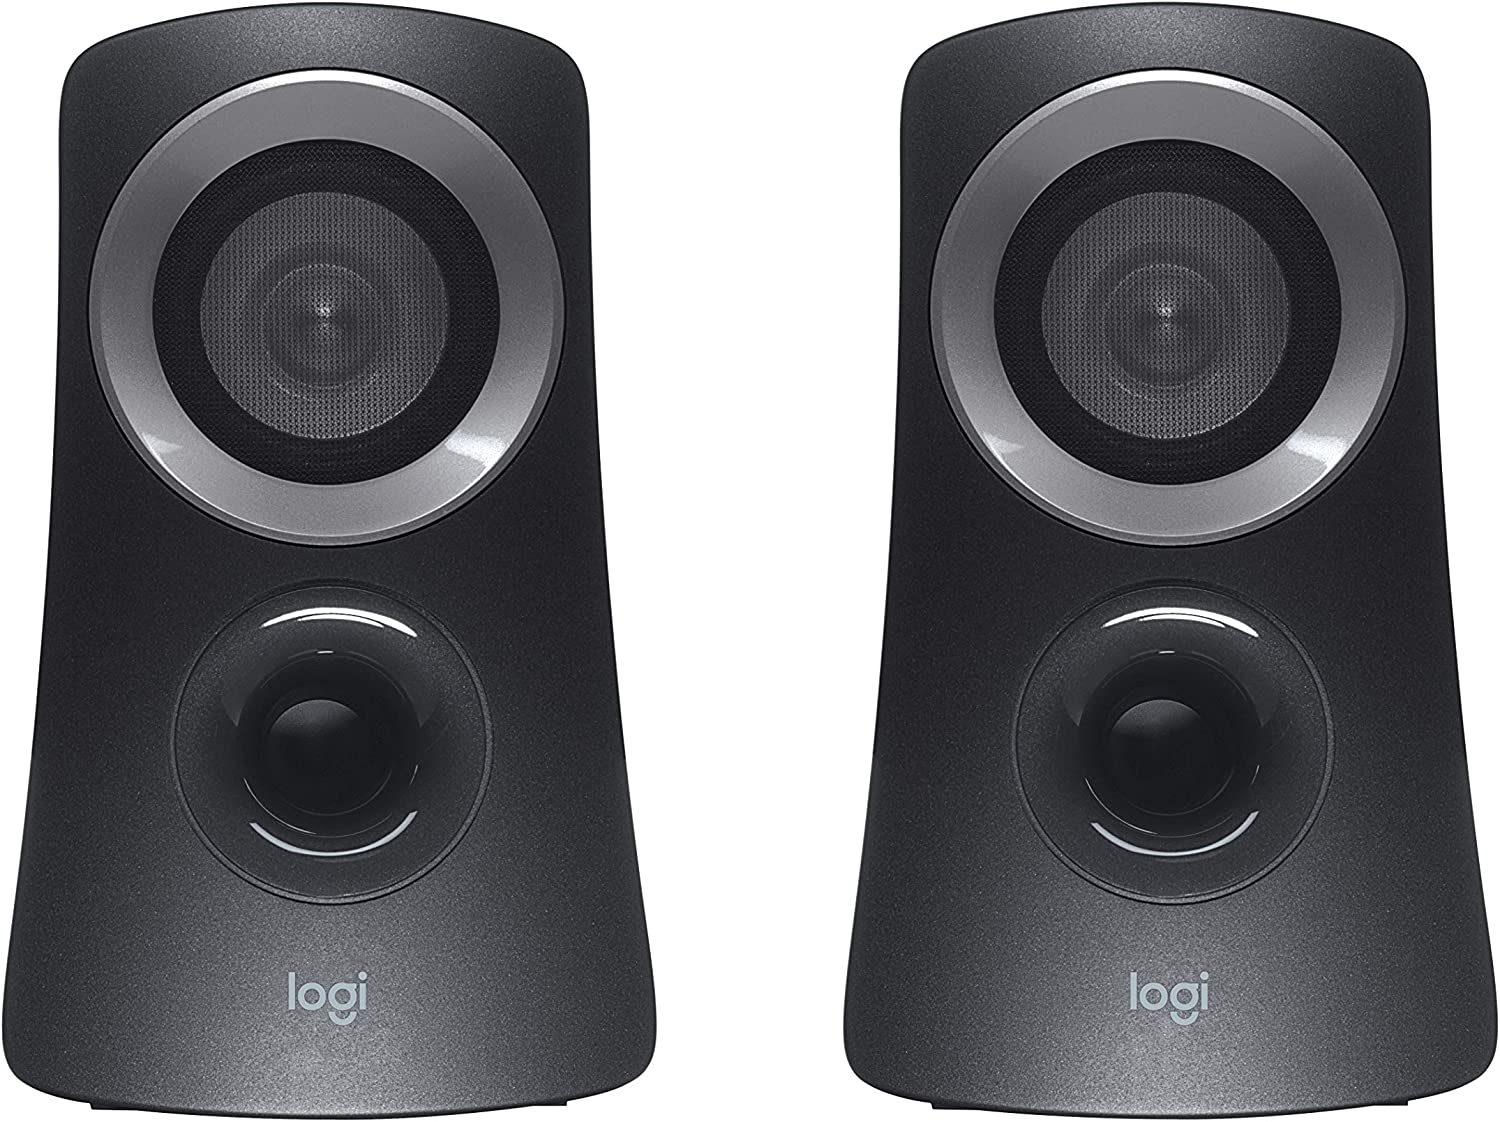 Logitech Z313 2.1 Multimedia Speaker System with Subwoofer, Full Range Audio, 50 Watts Peak Power, Strong Bass, 3.5mm Inputs, PC/PS4/Xbox/TV/Smartphone/Tablet/Music Player – Black